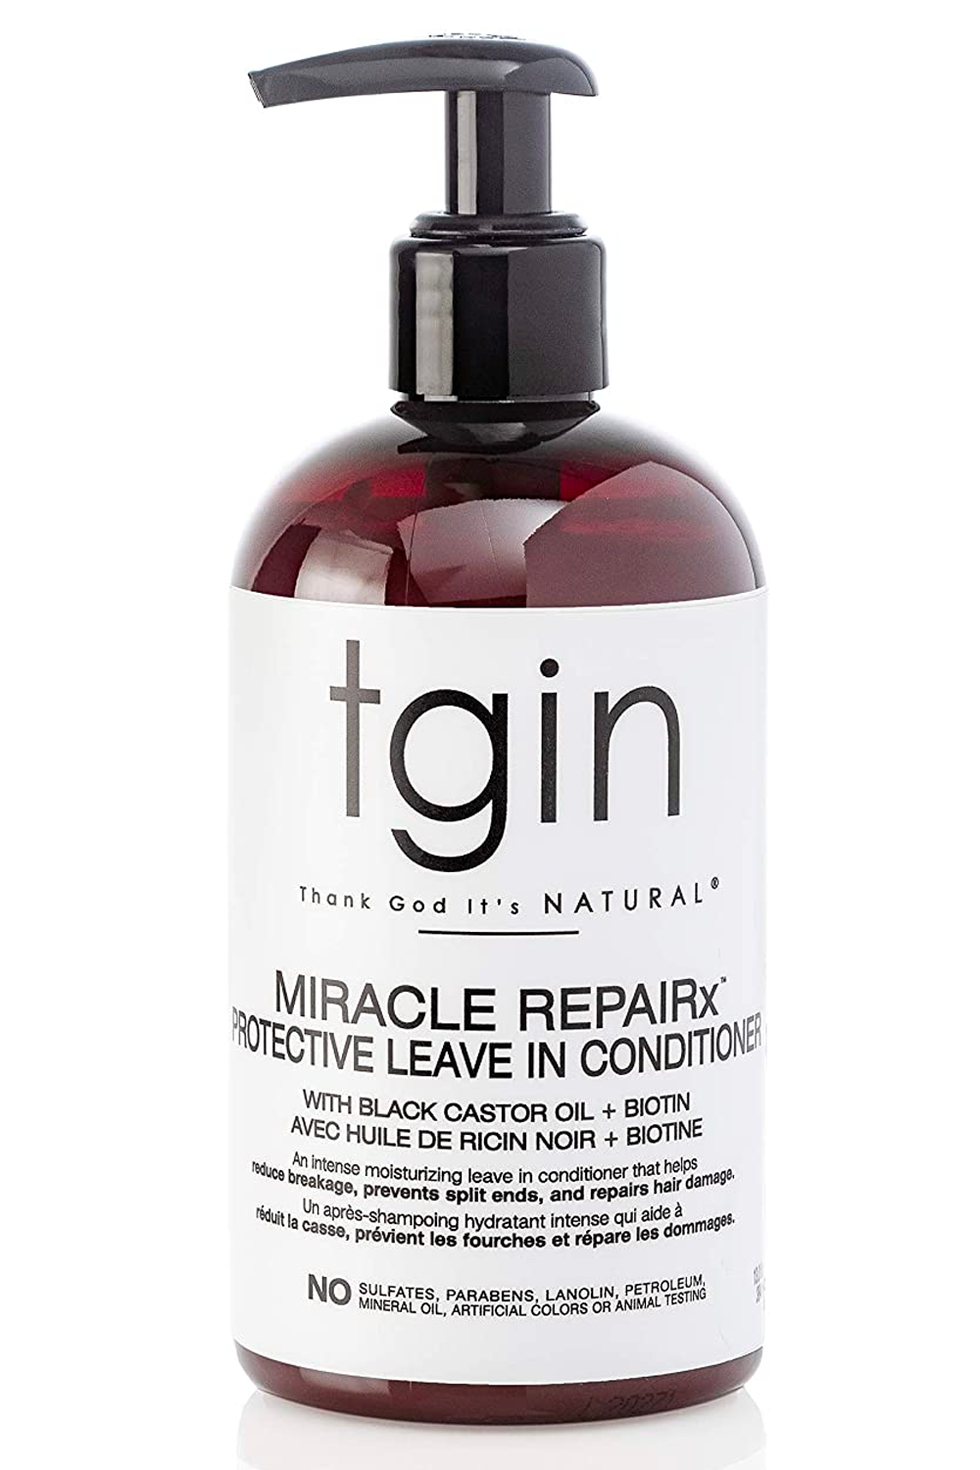 TGIN Miracle RepaiRx Protective Leave-In Conditioner